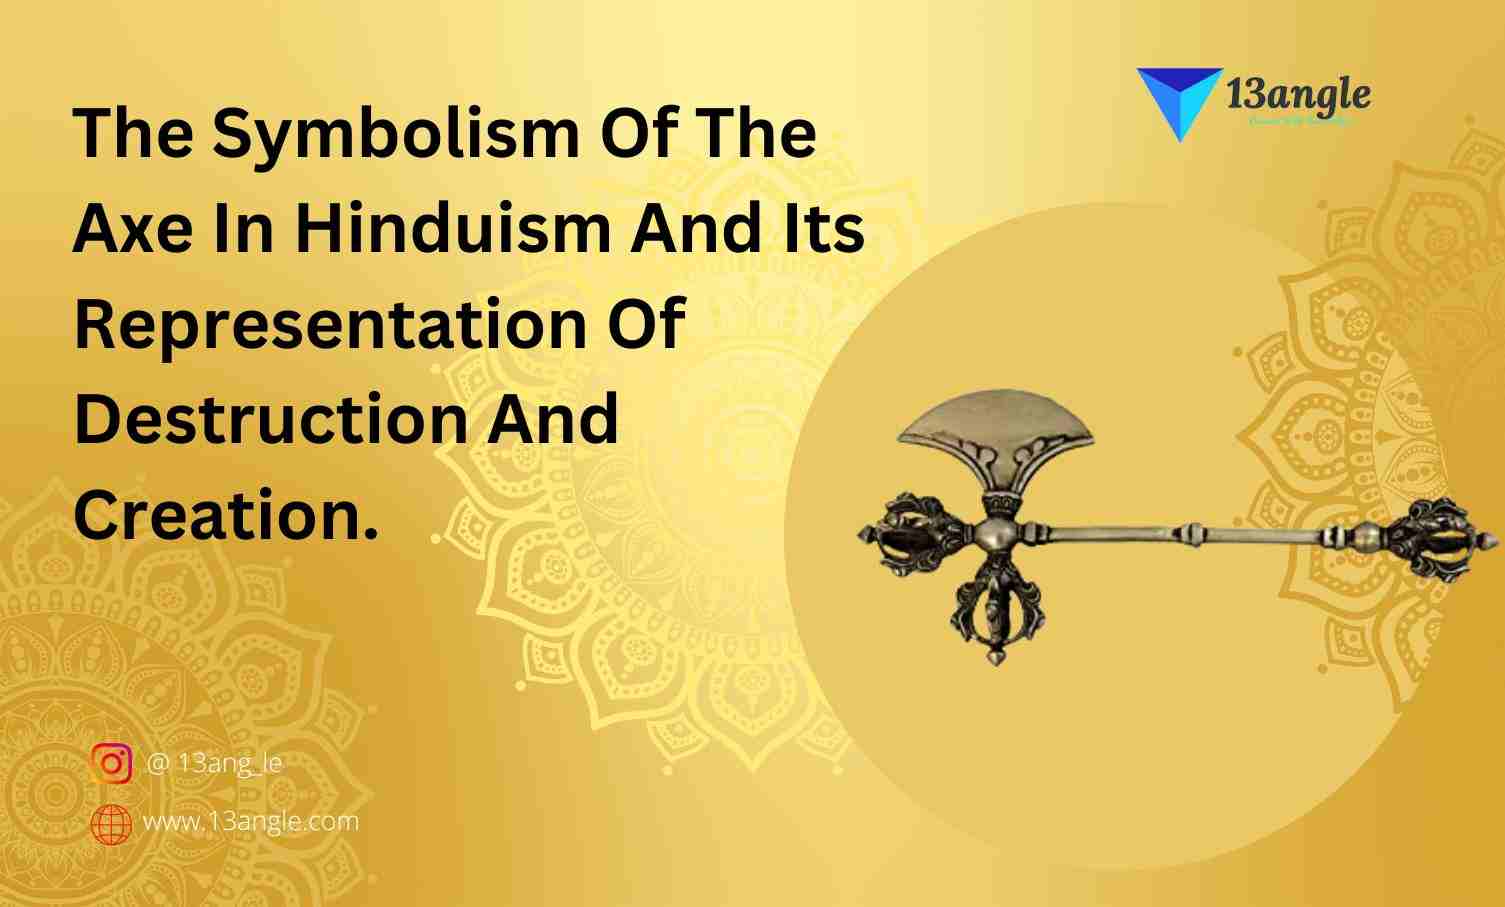 The Symbolism Of The Axe In Hinduism And Its Representation Of Destruction And Creation- The Bridge